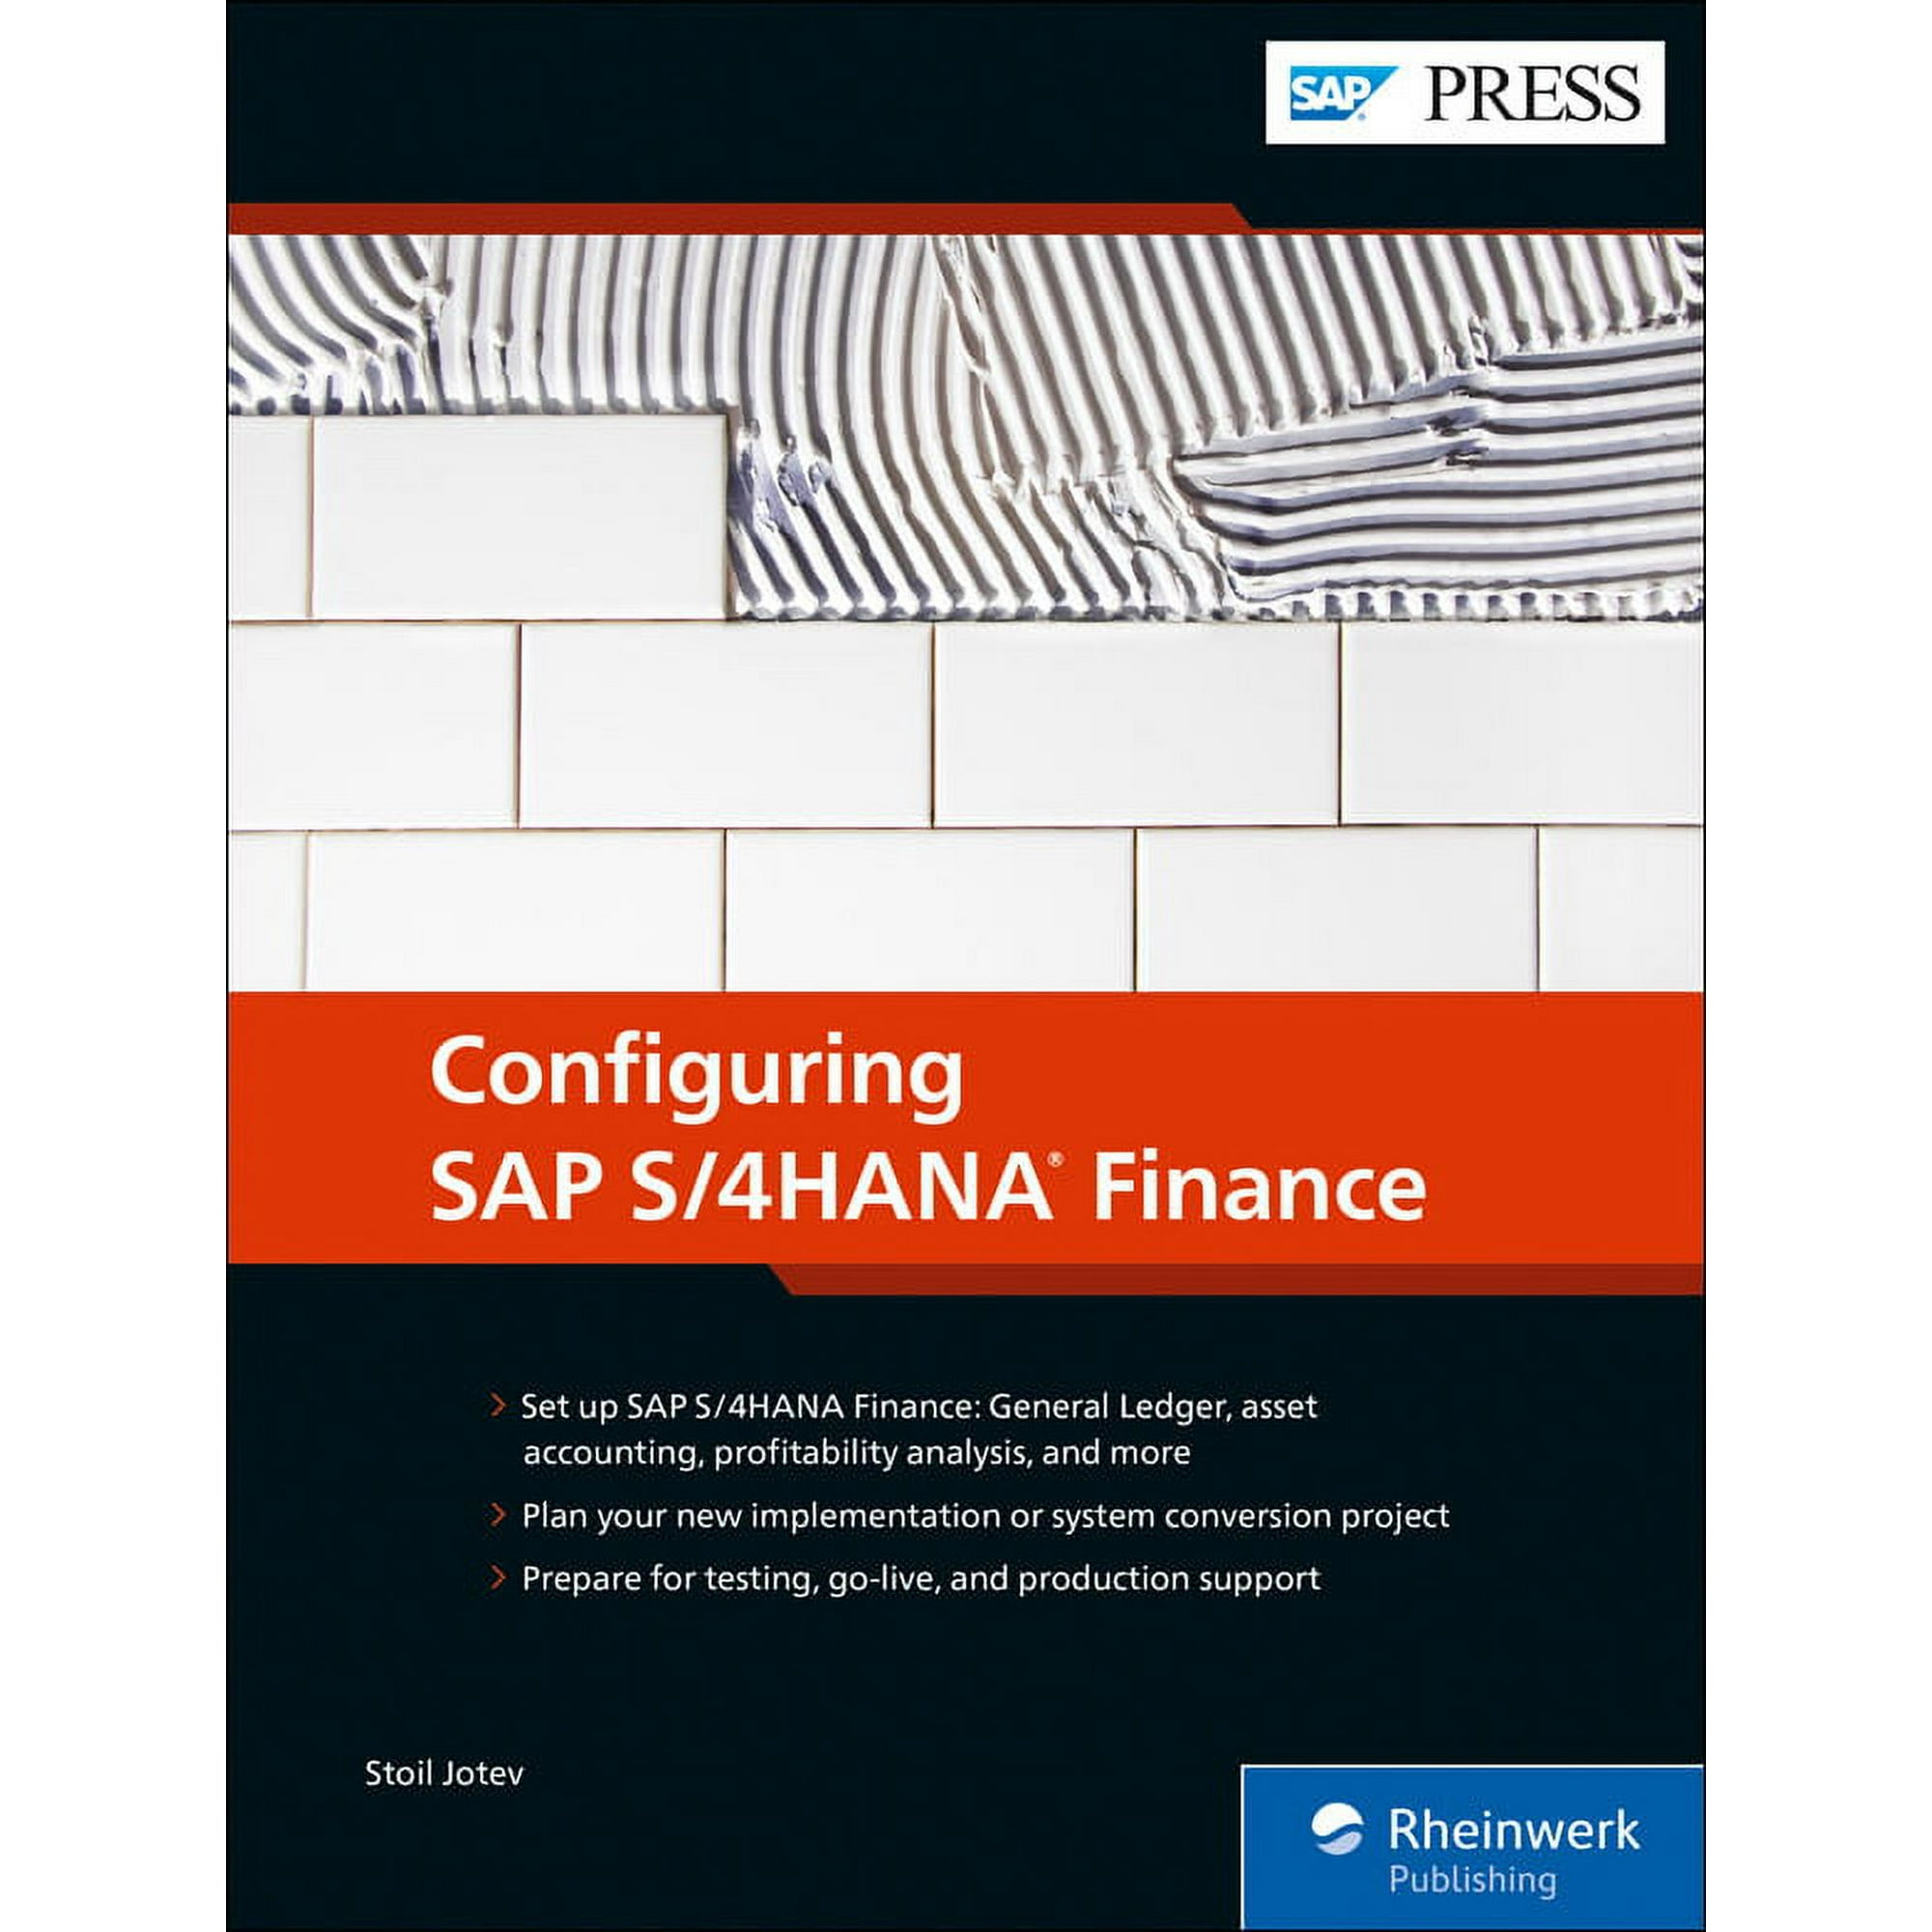 SAP S/4HANA Conversion projects – Tips on Asset Accounting